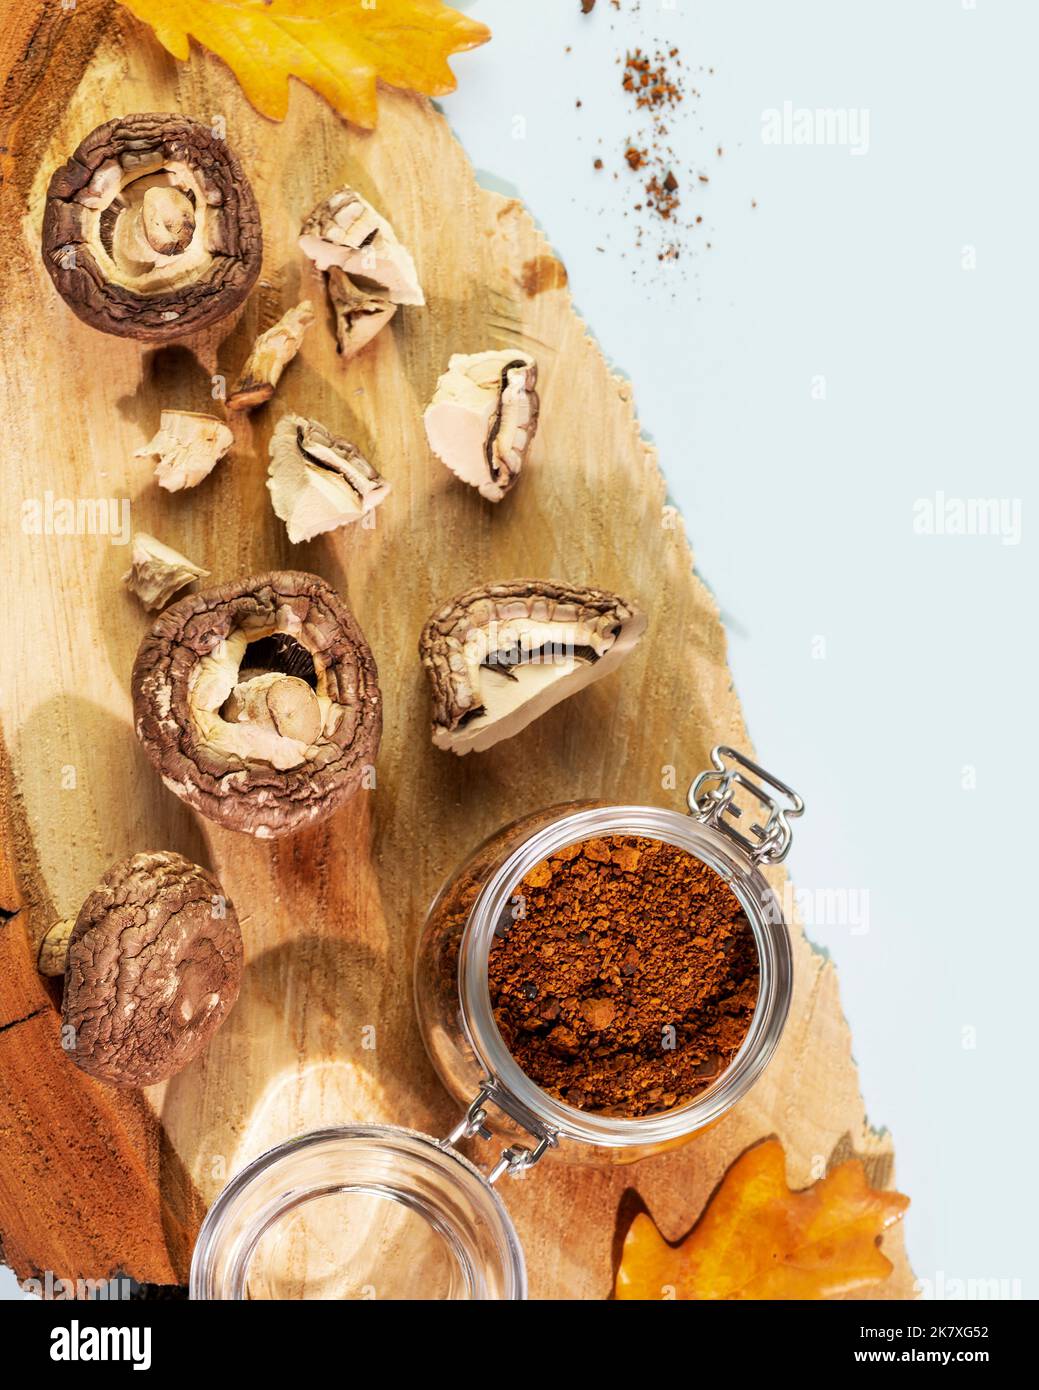 Pieces of dry mushrooms with chaga powder on a wooden podium Stock Photo